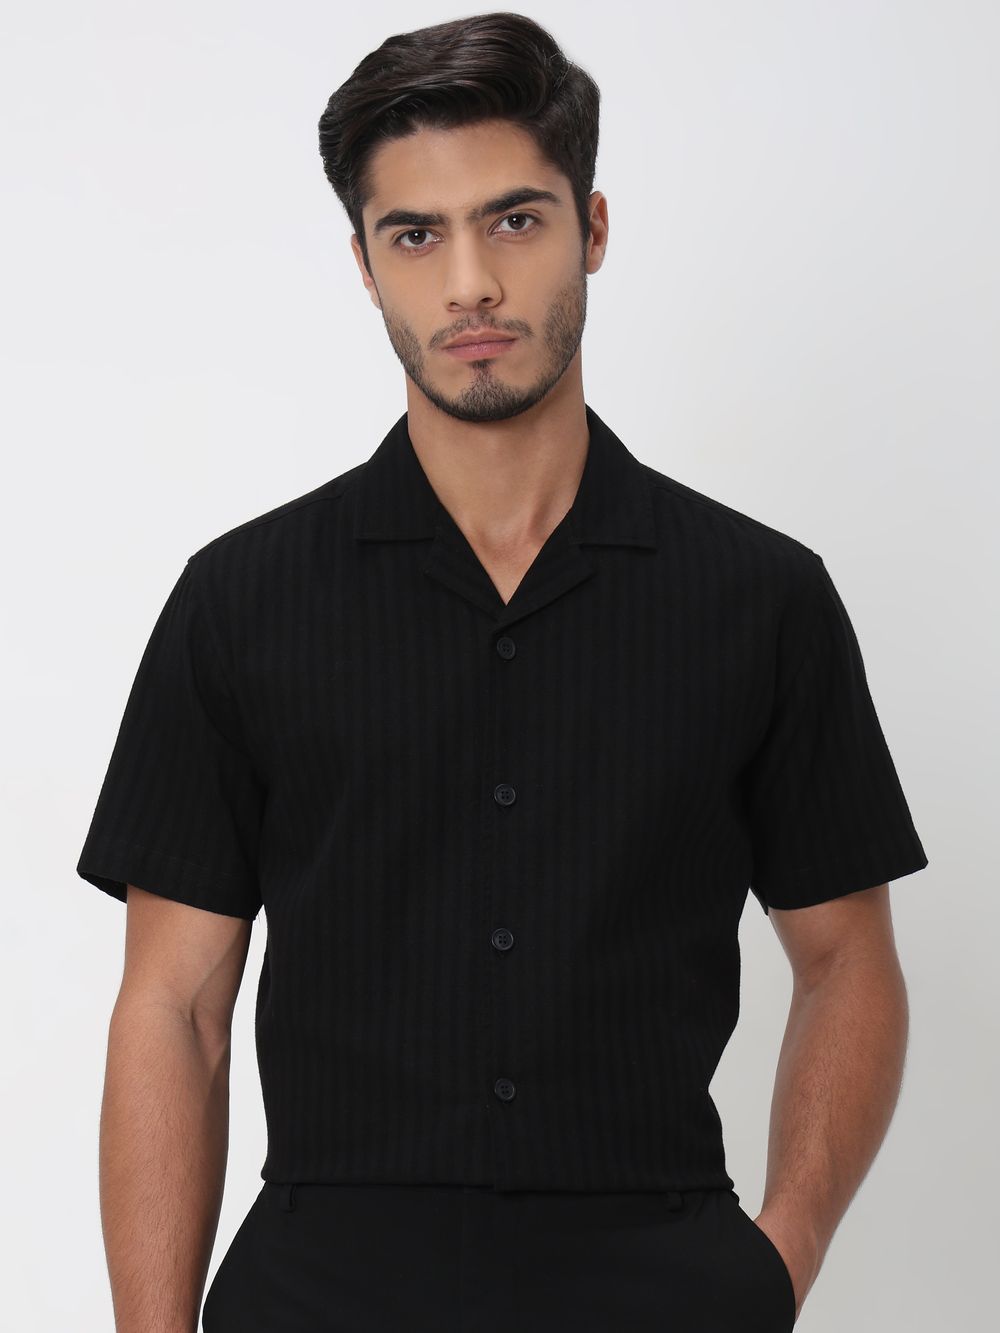 Black Self-Stripe Plain Relaxed Fit Casual Shirt